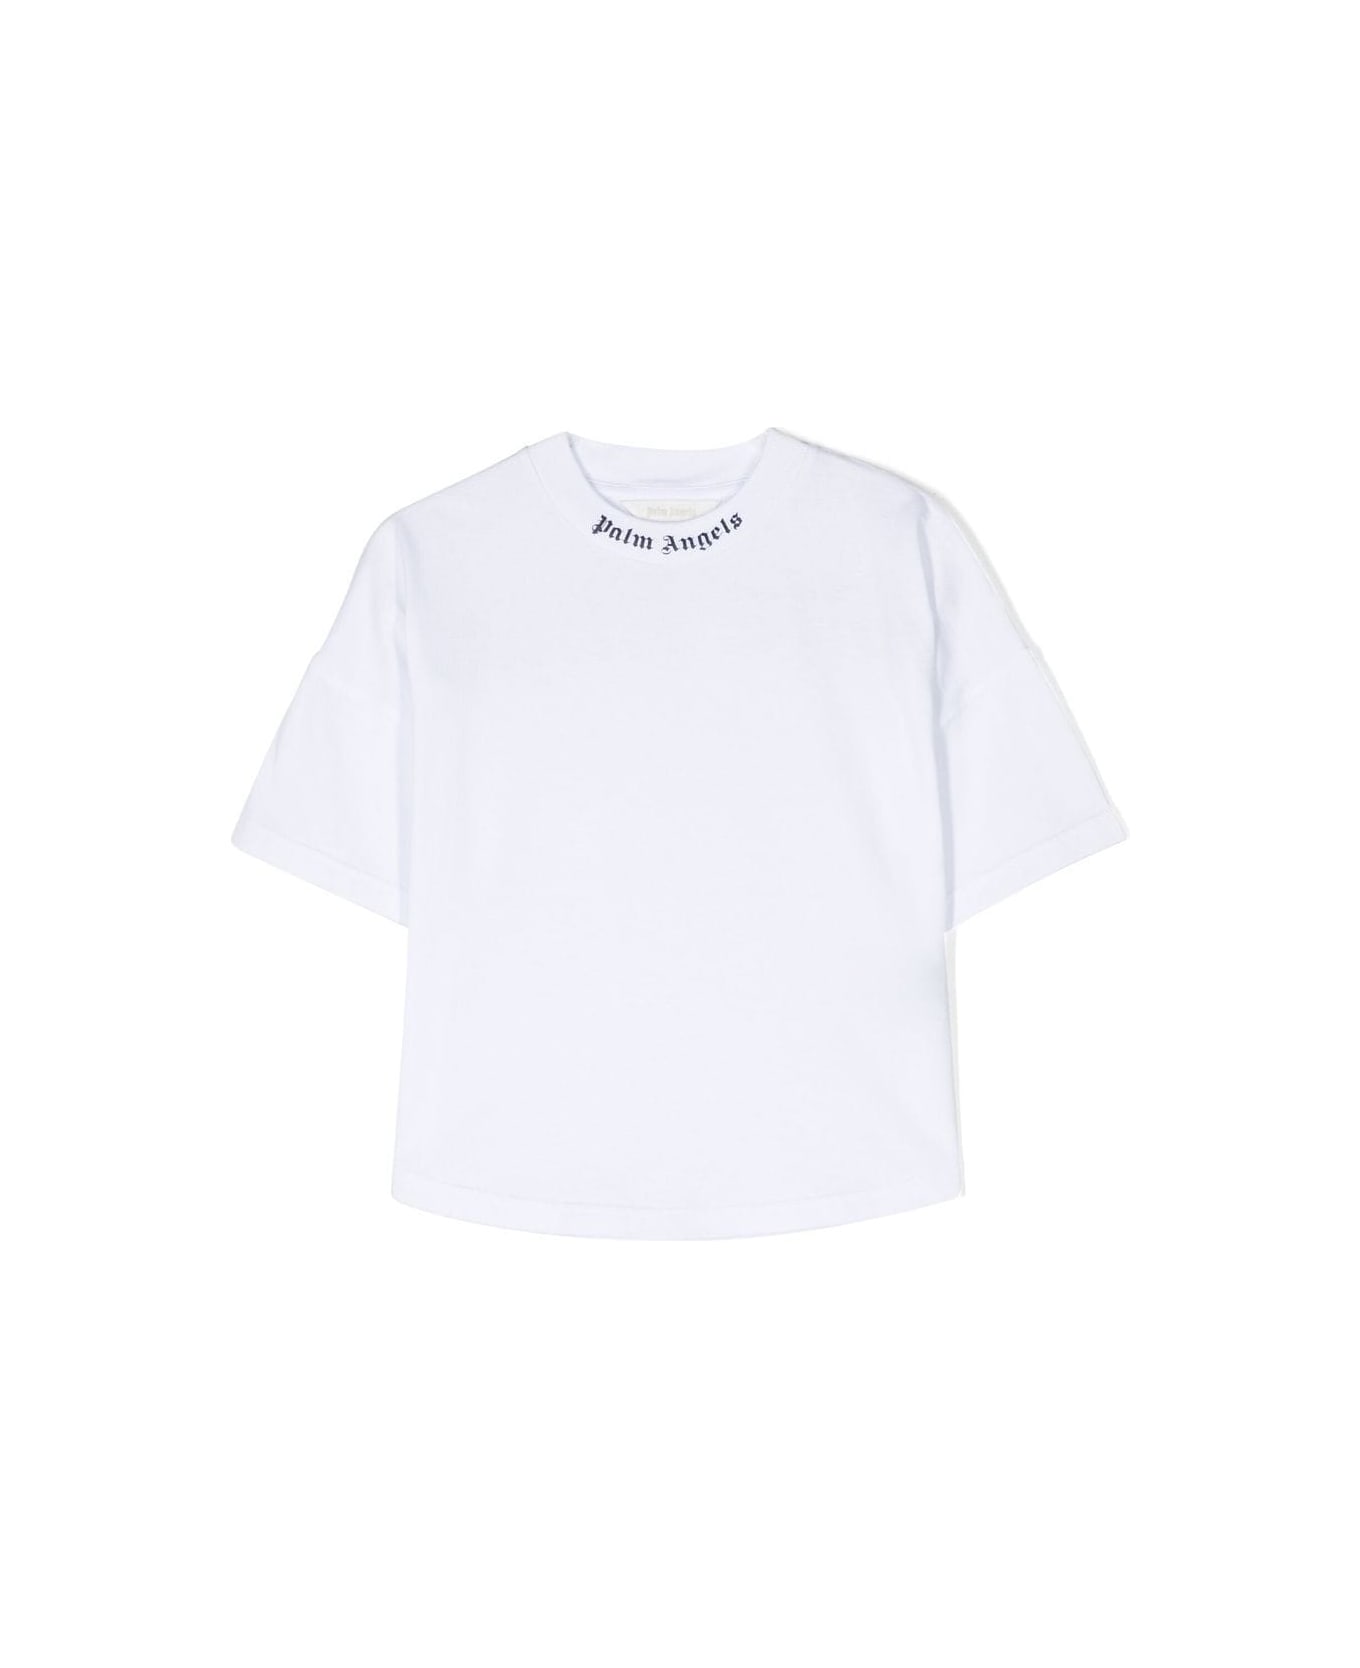 Palm Angels Classic Overlogo Short Sleeves T-shirt - White Navy Tシャツ＆ポロシャツ